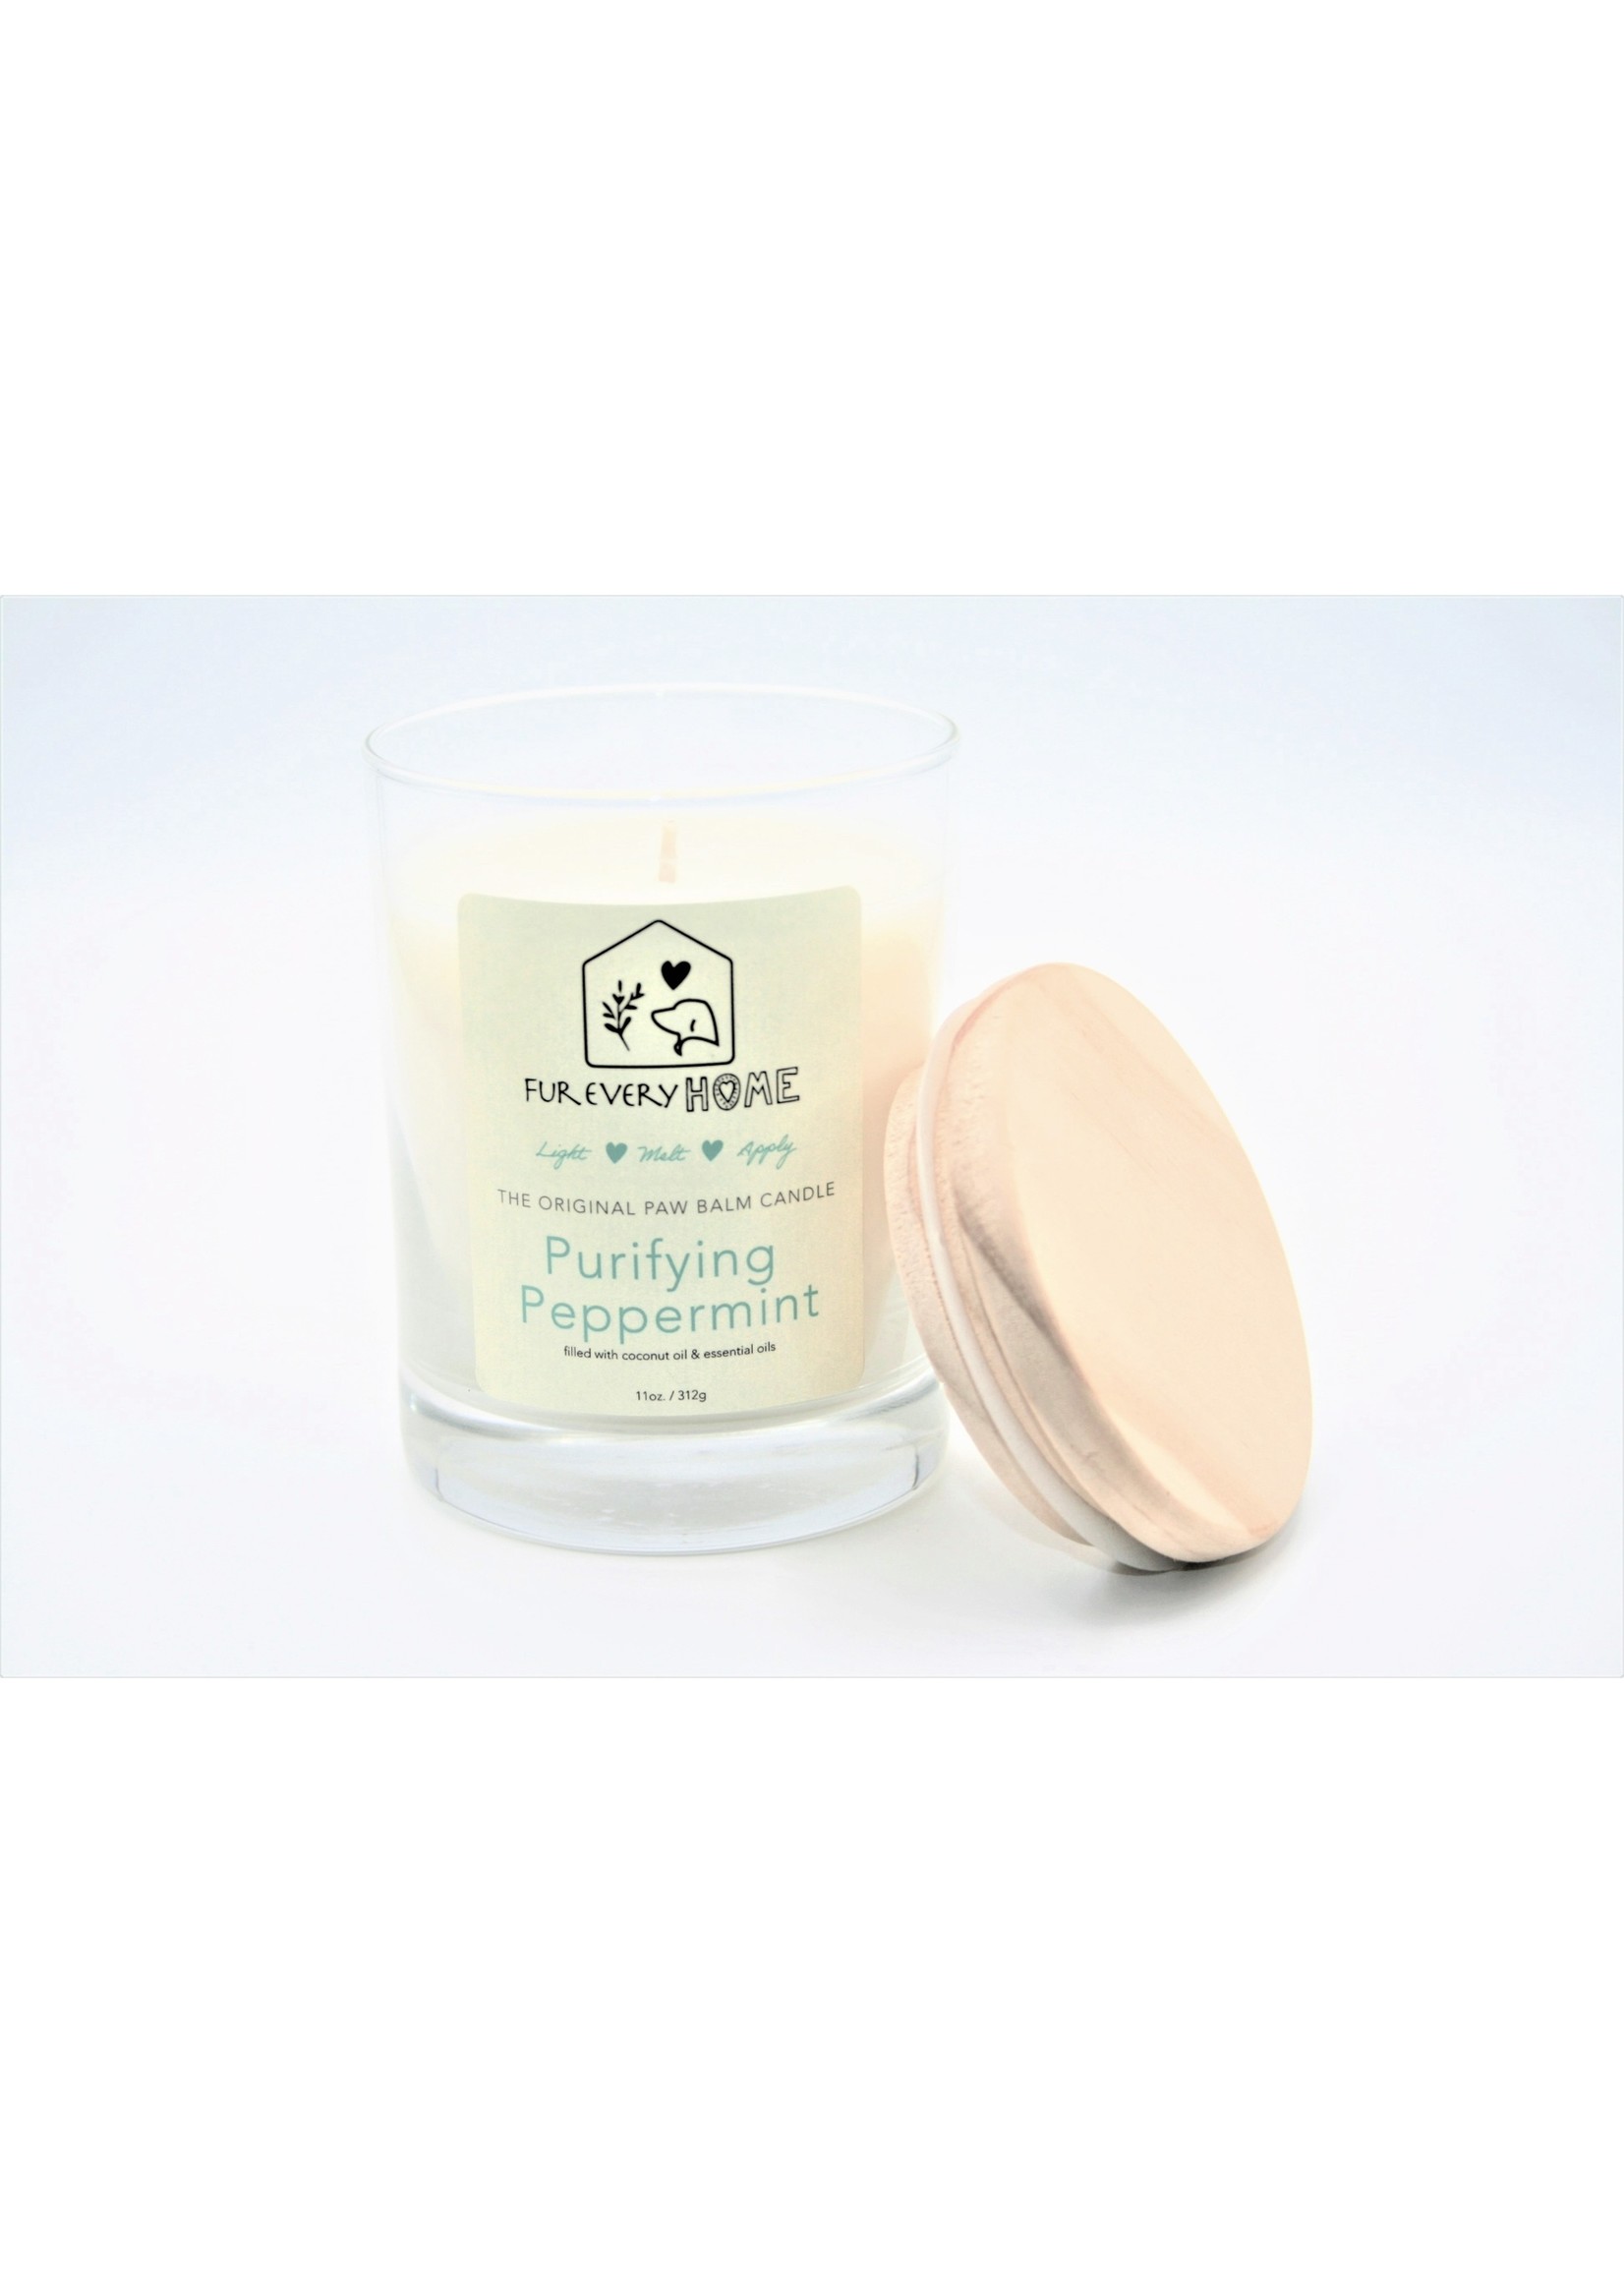 Fur Every Home Purifying Peppermint Dog Paw Balm Candle